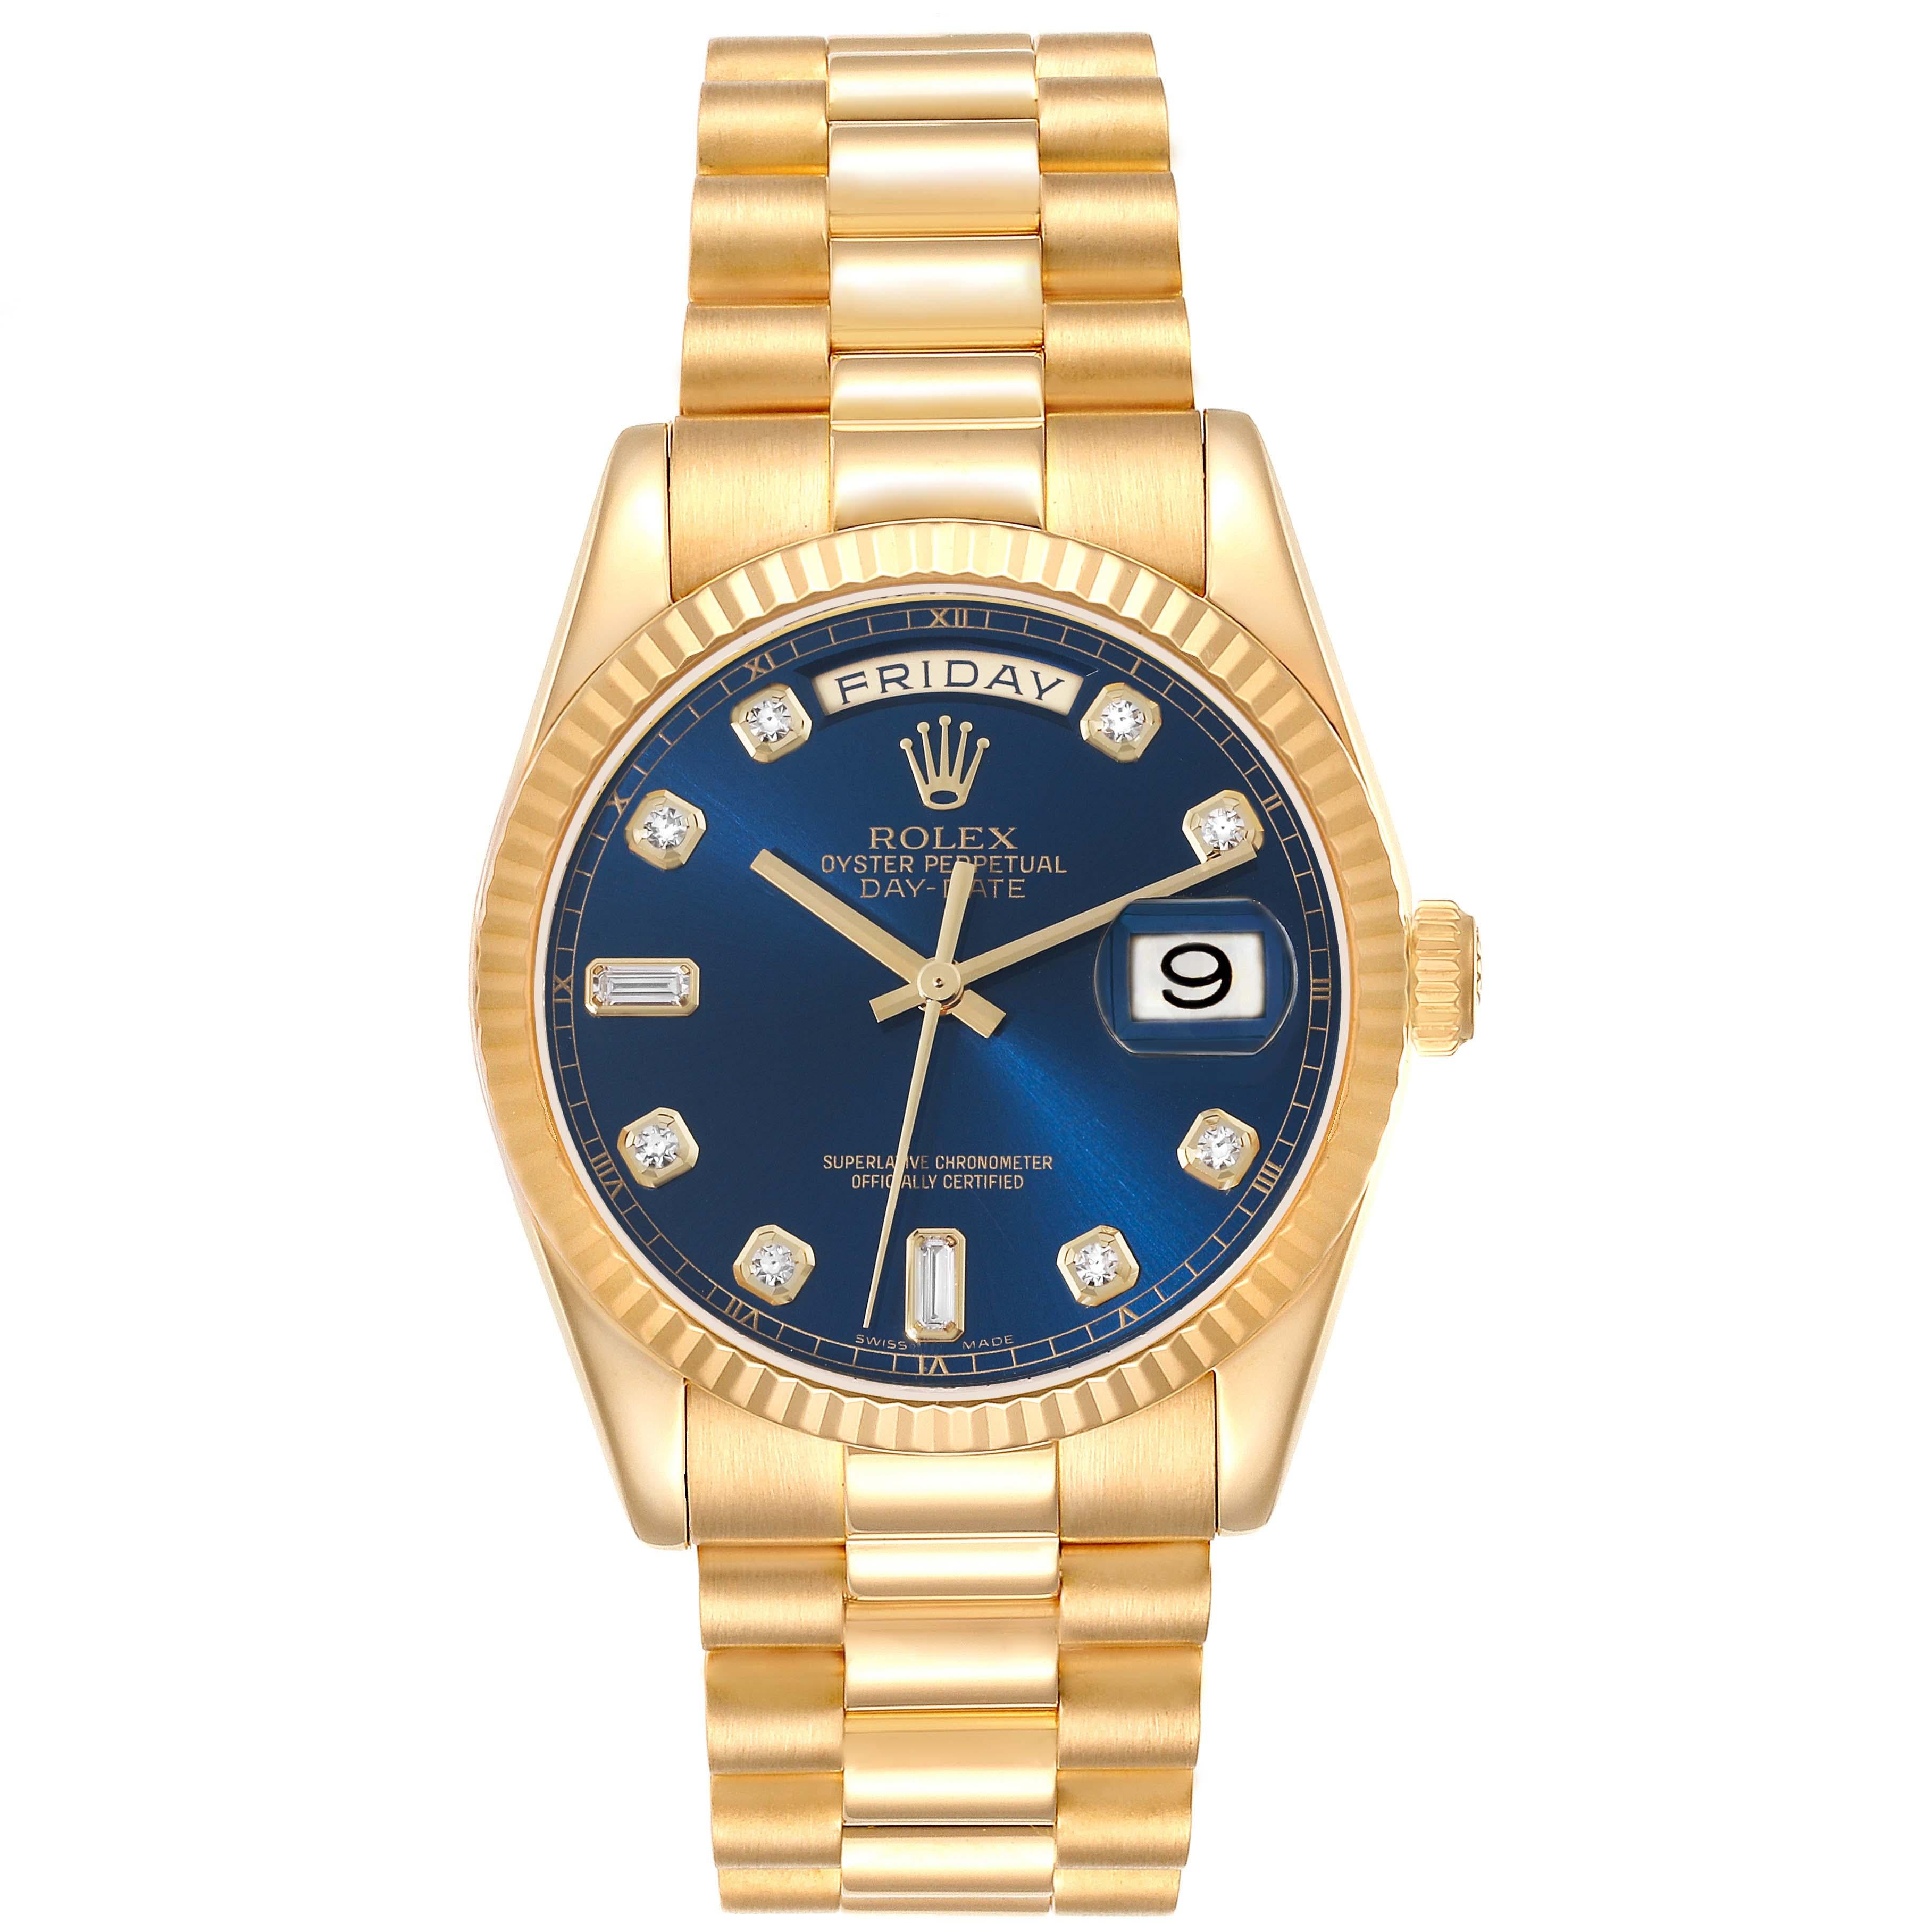 Rolex President Day Date Yellow Gold Blue Diamond Dial Mens Watch 118238. Officially certified chronometer automatic self-winding movement. 18k yellow gold oyster case 36.0 mm in diameter. Rolex logo on a crown. 18K yellow gold fluted bezel. Scratch